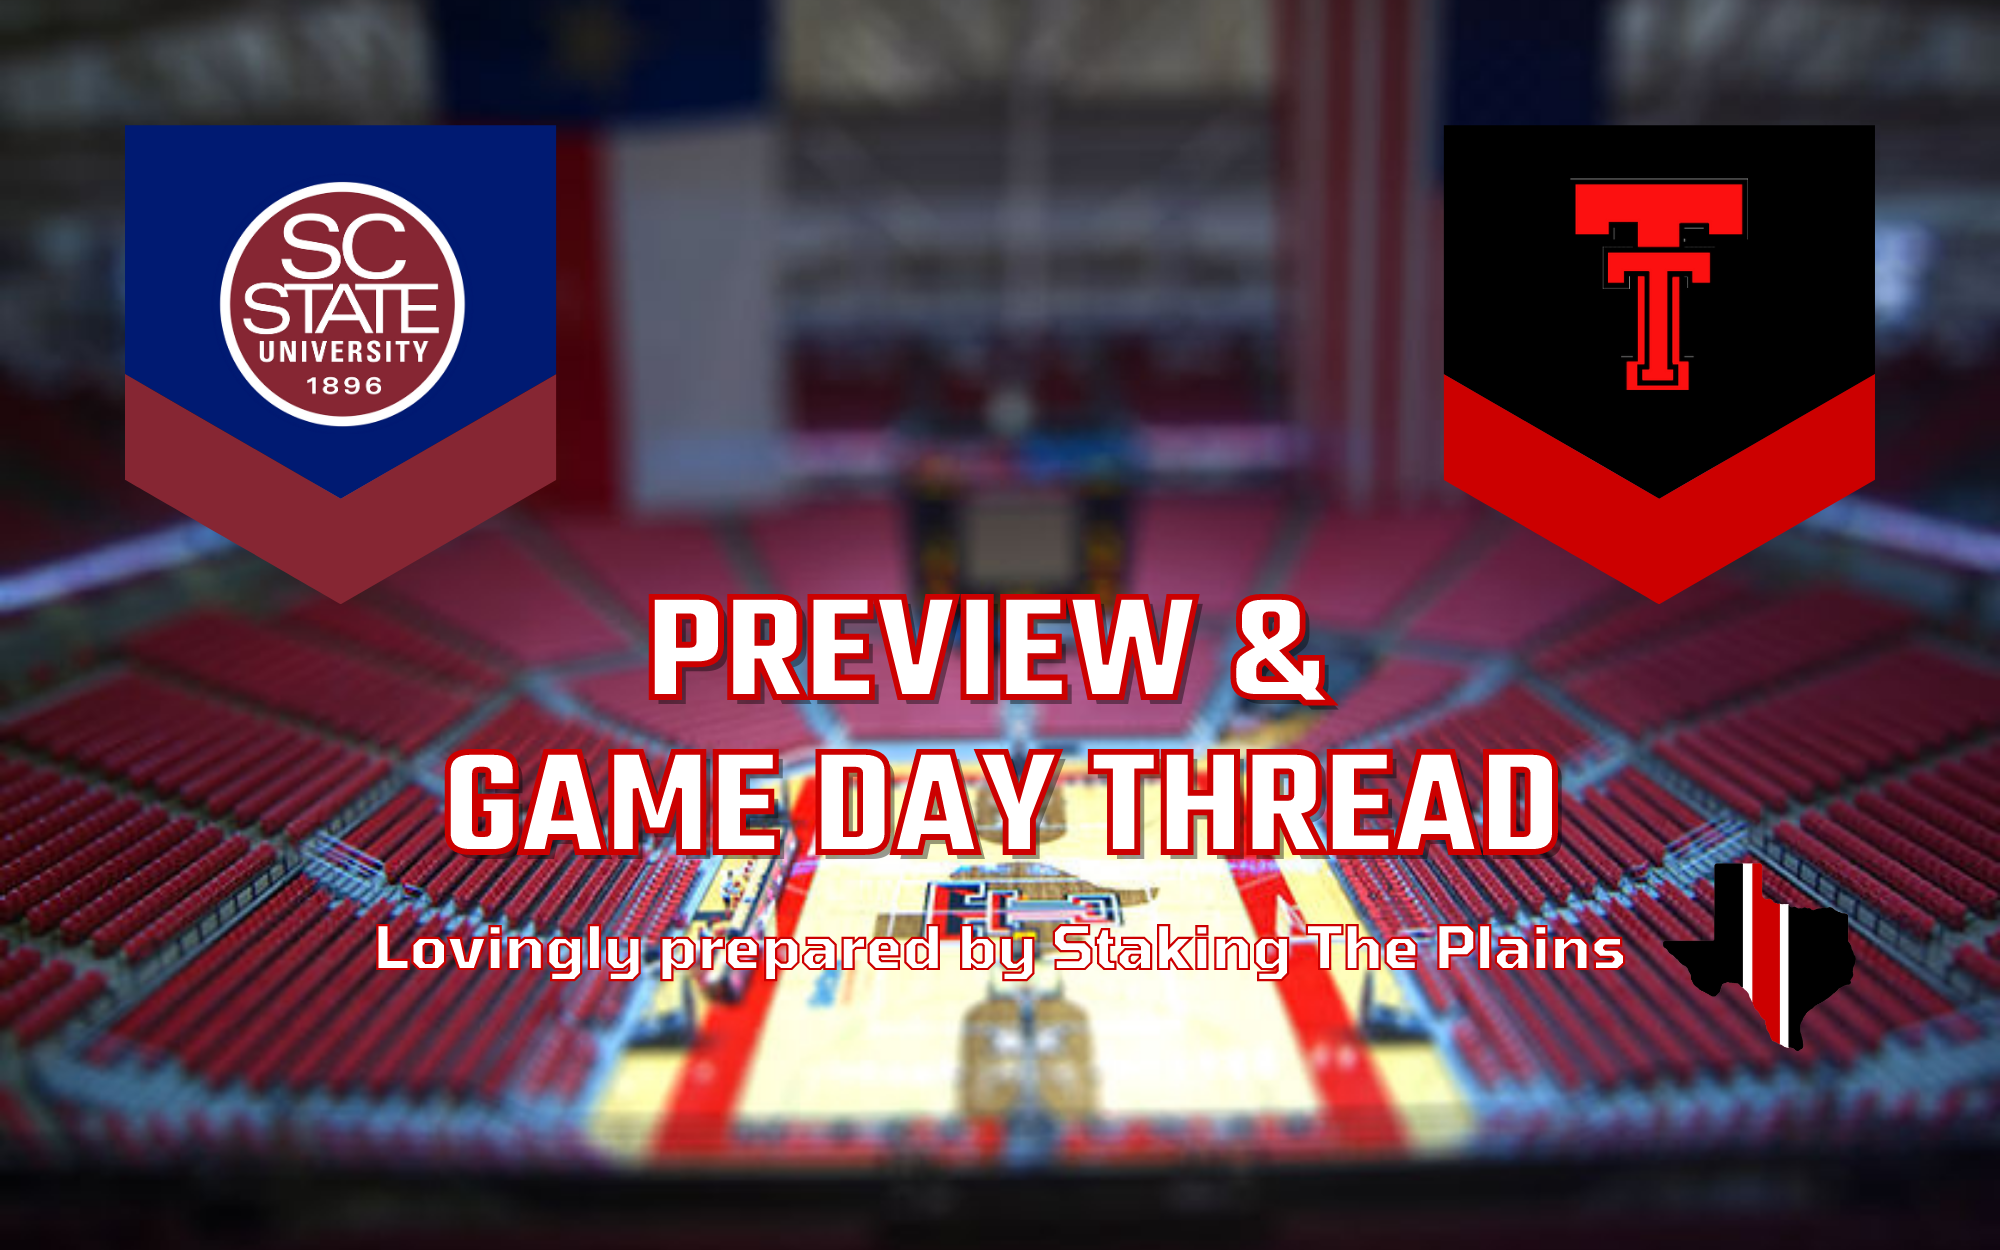 Preview & Game Day Thread: South Carolina State vs. Texas Tech